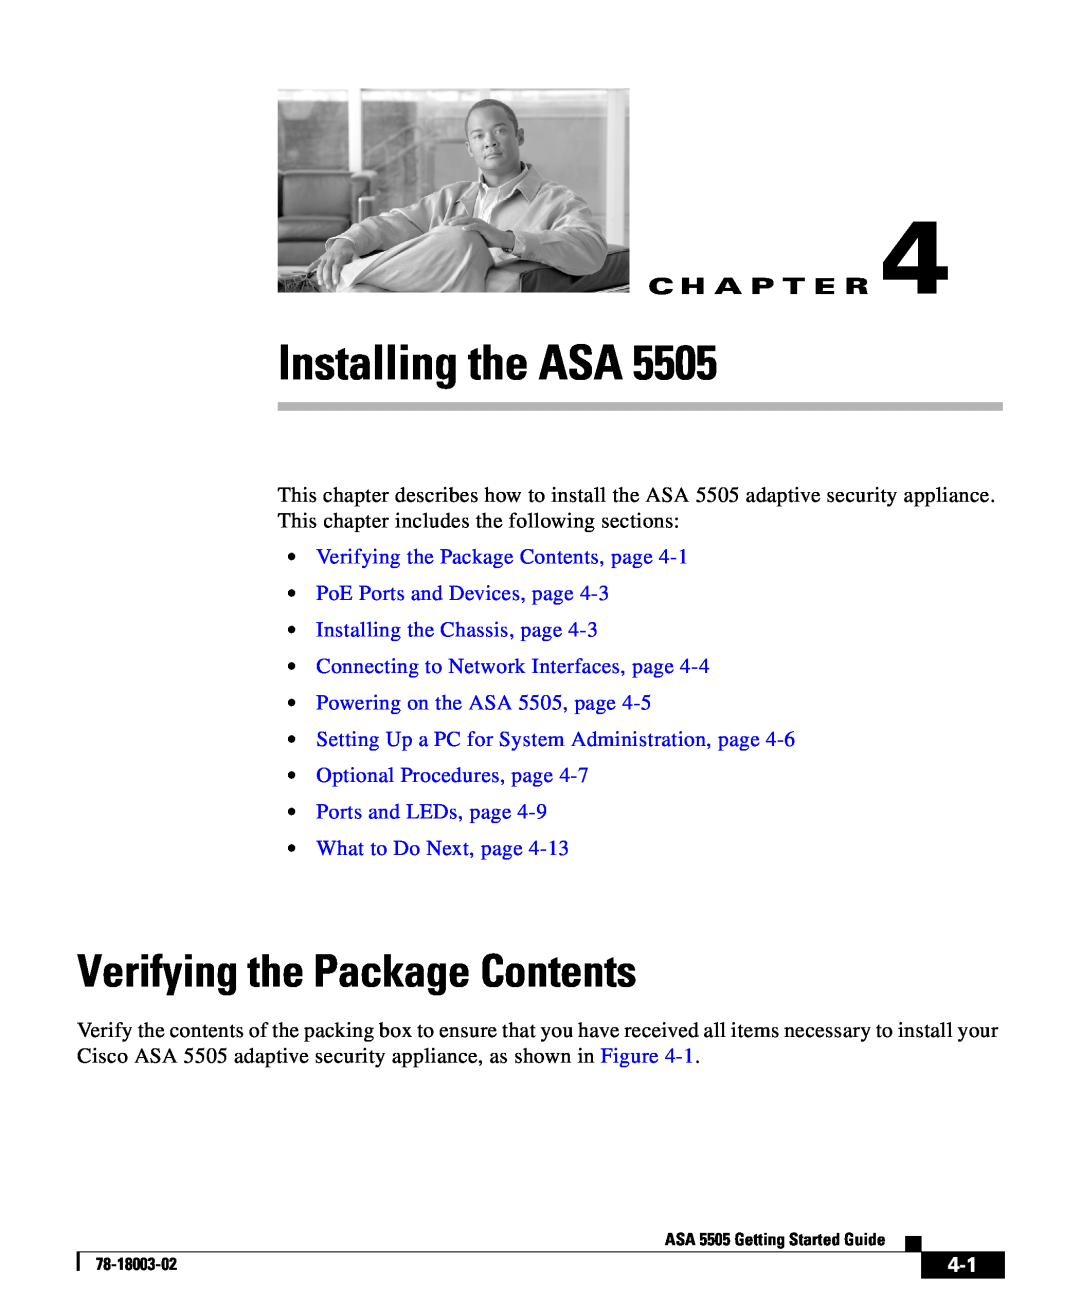 Cisco Systems 5505 manual Verifying the Package Contents, Installing the ASA, C H A P T E R 